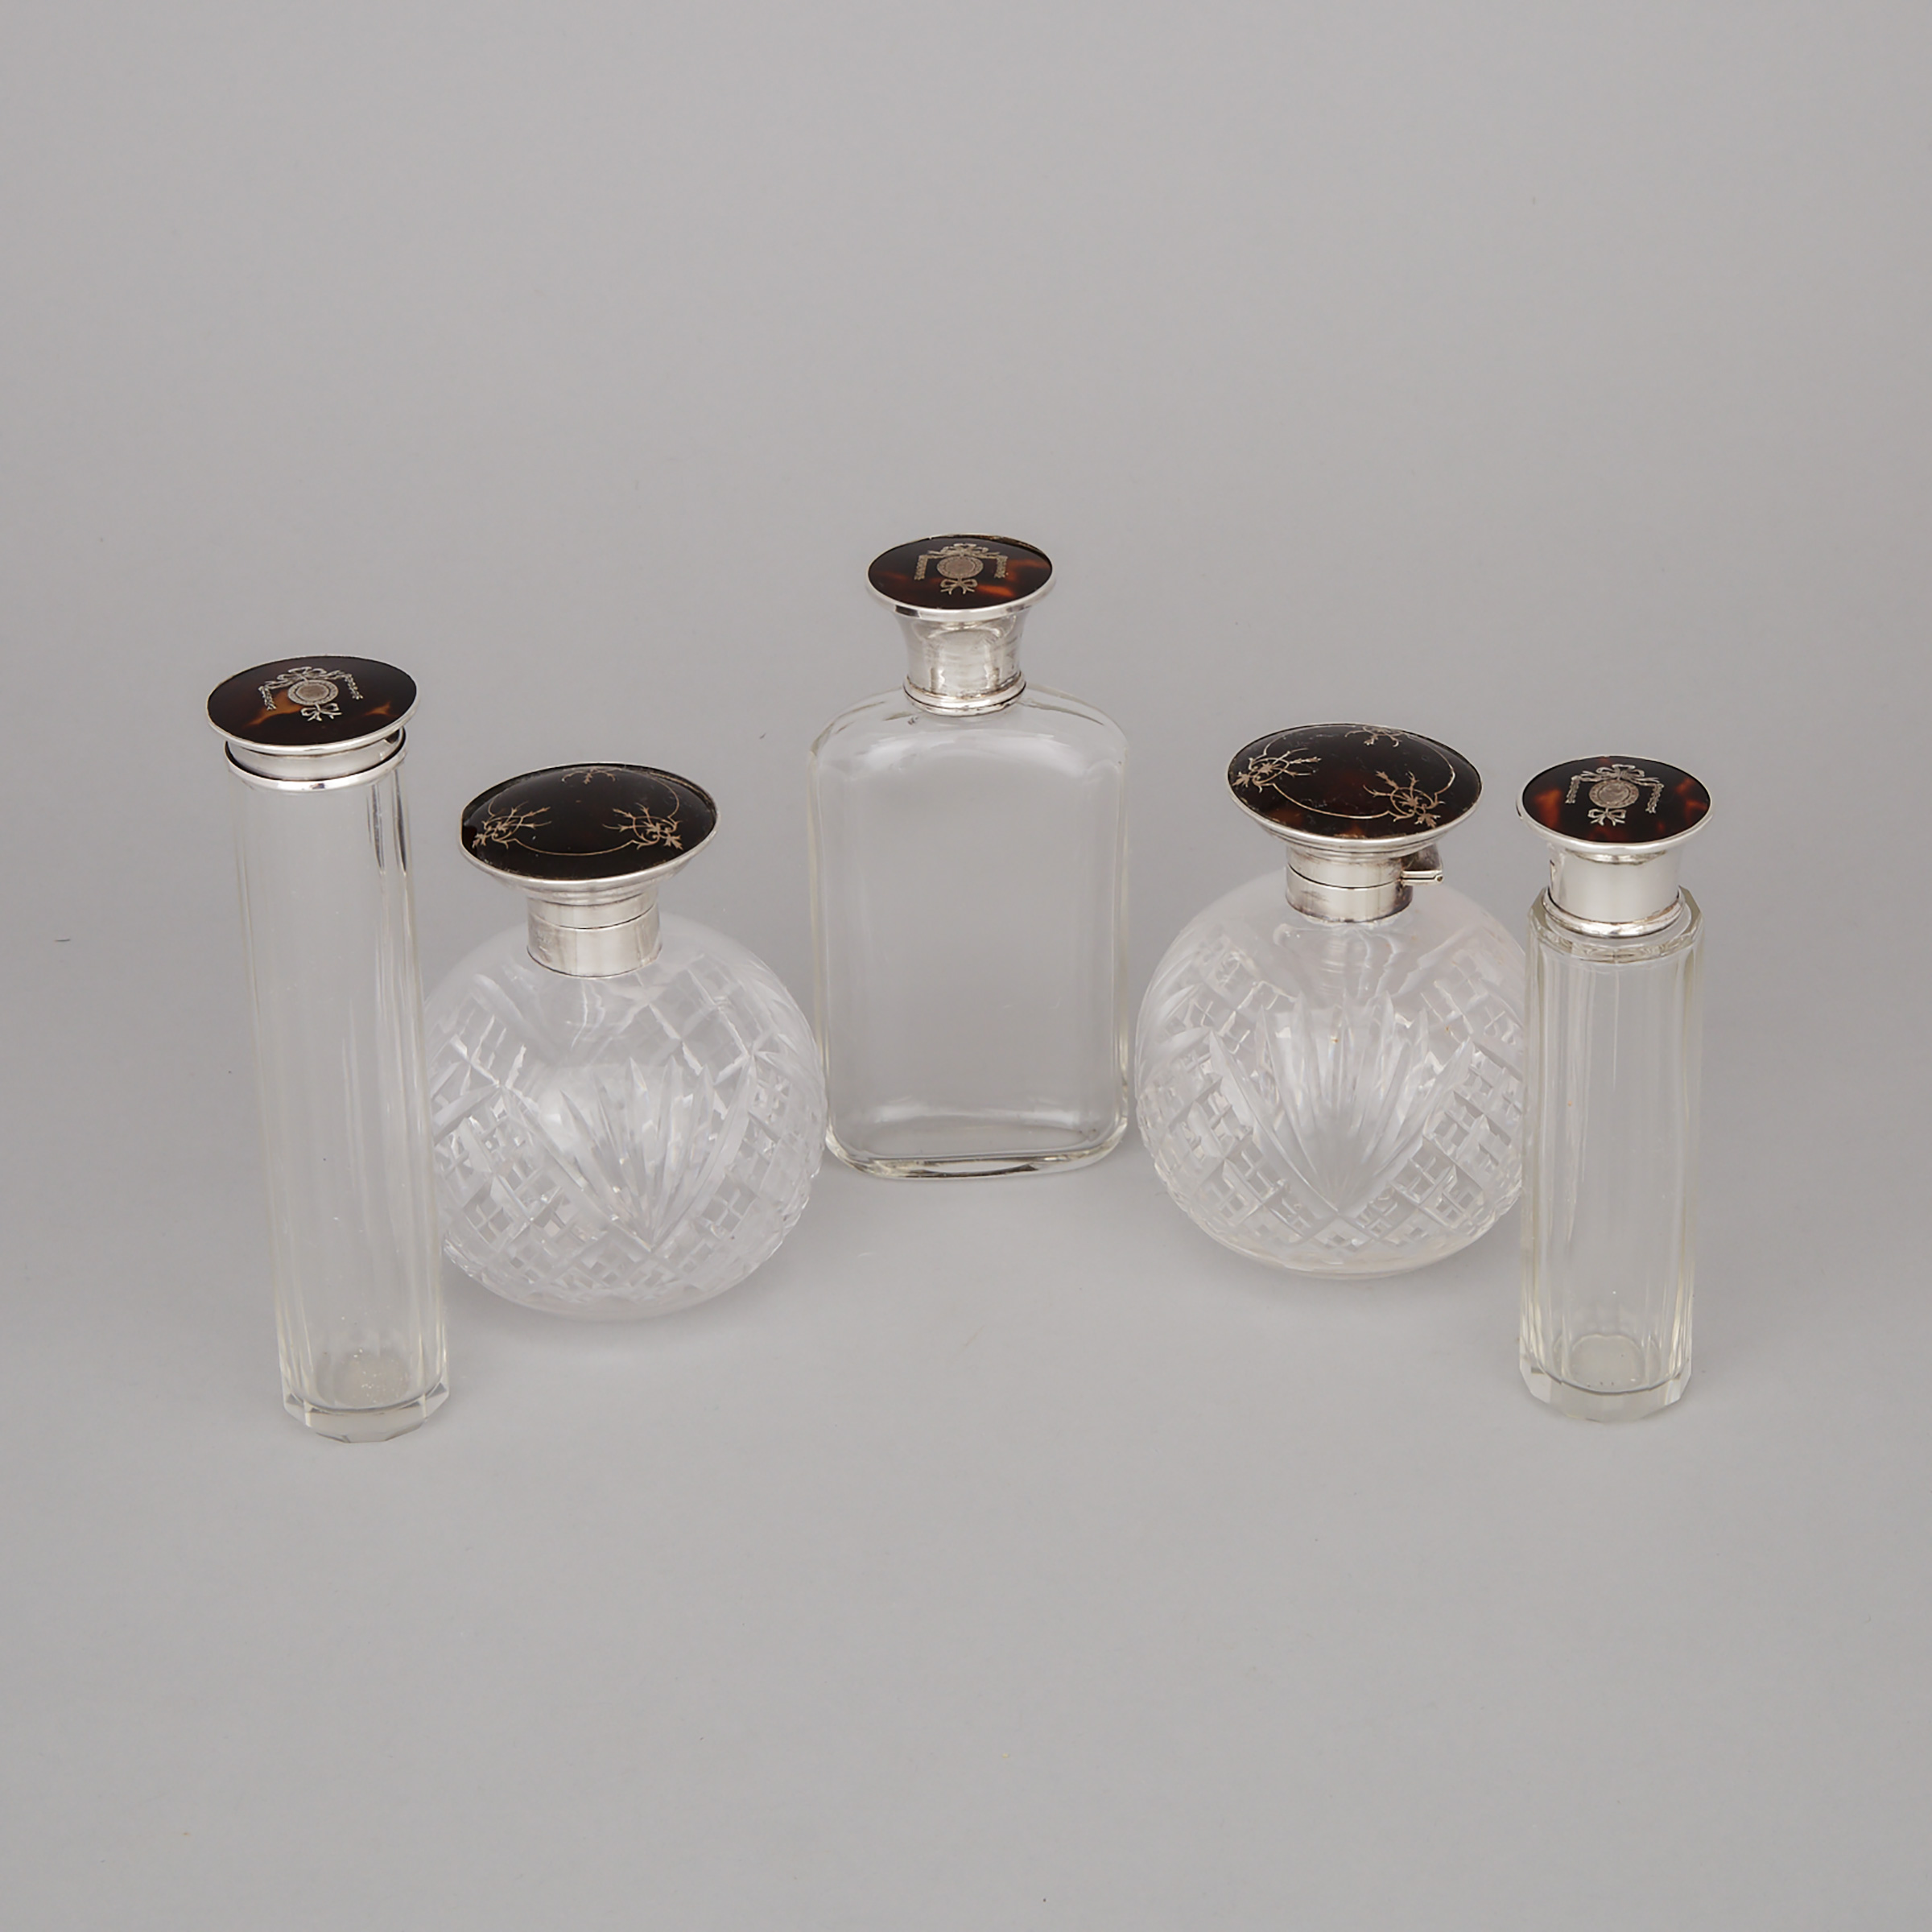 Five English Silver and Tortoiseshell Mounted Cut Glass Toilet Water Bottles and Jars, 1920s